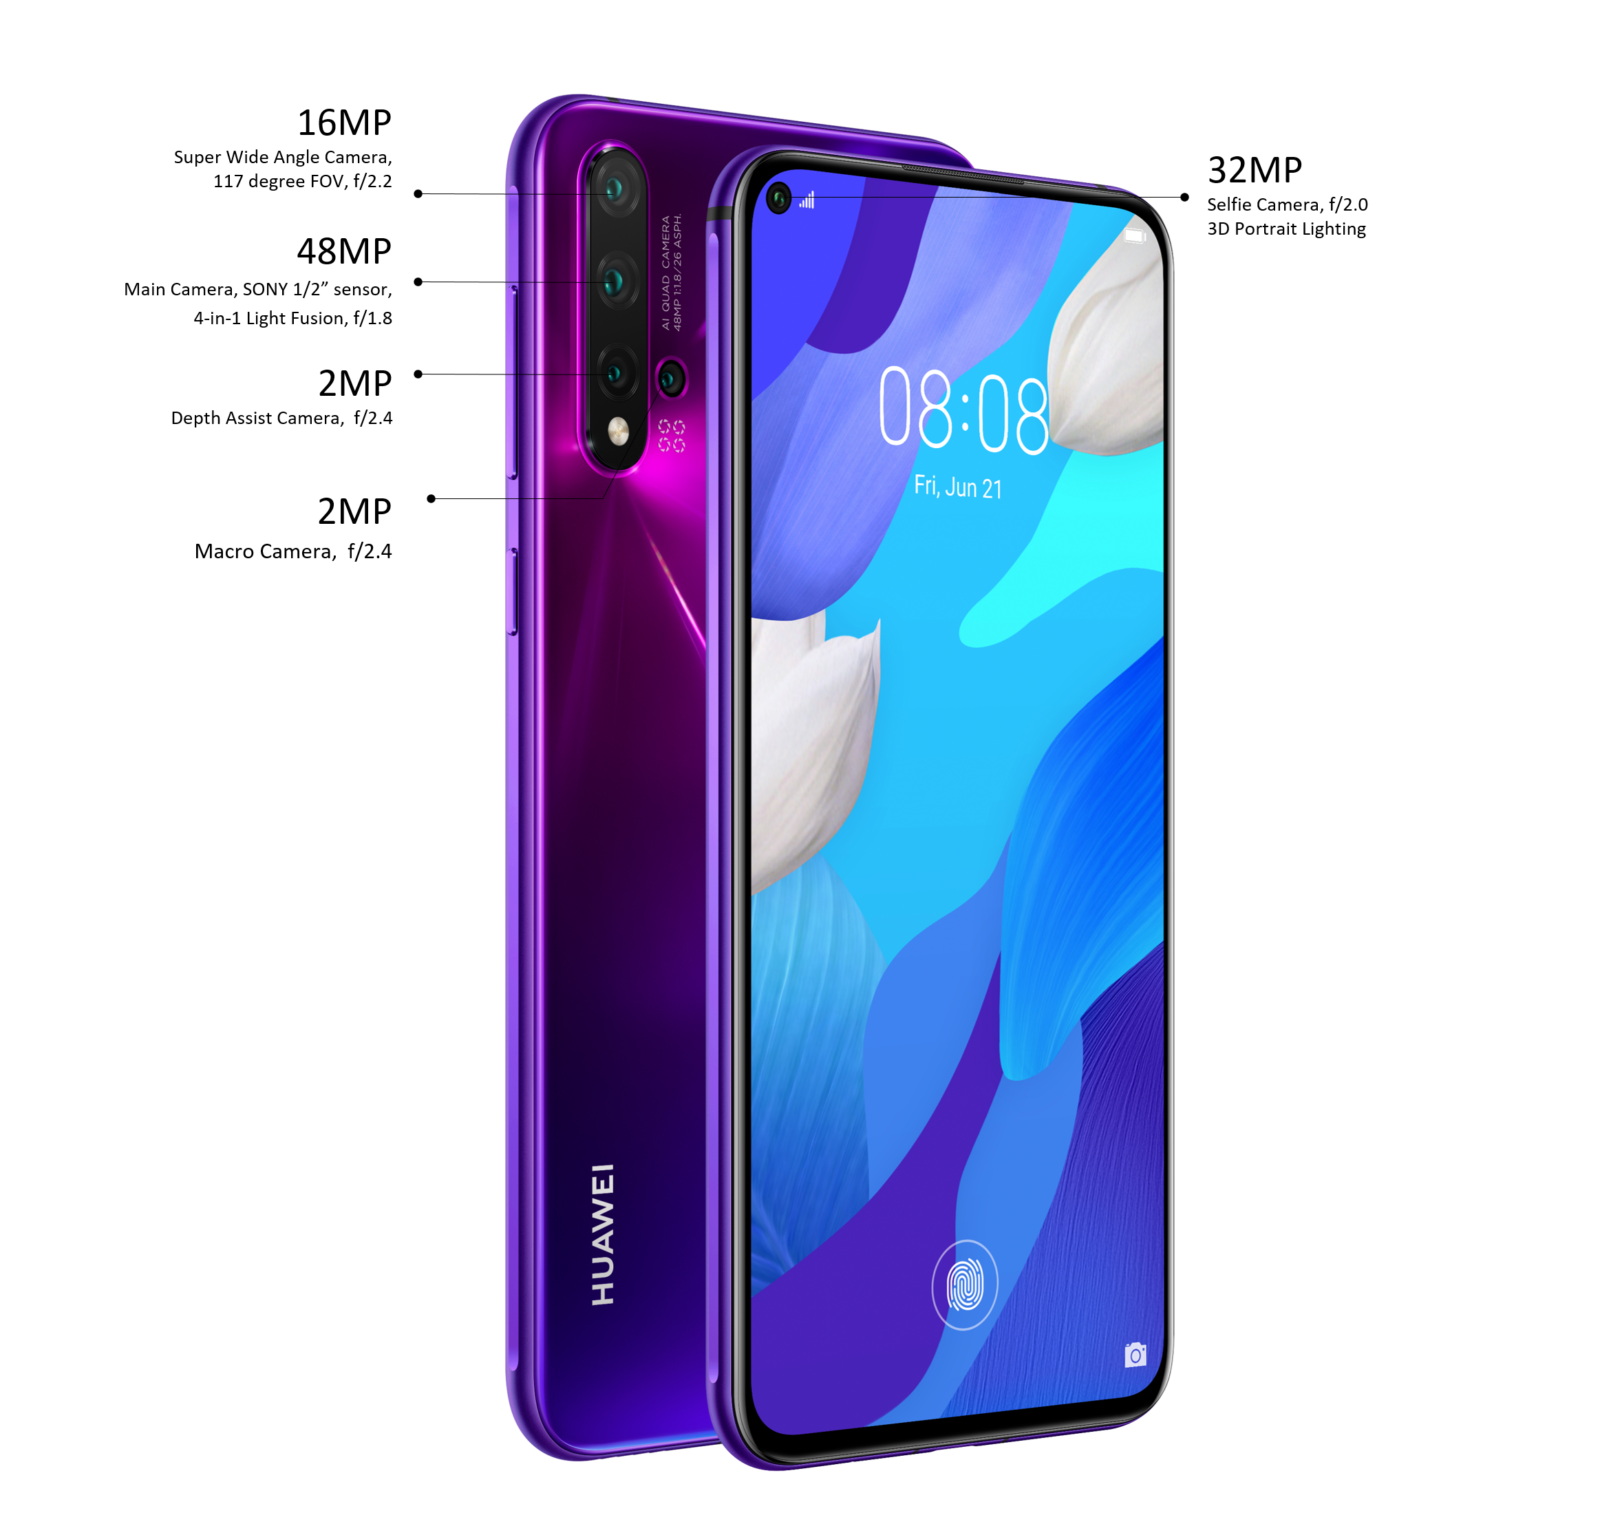 [Test] Flagship Performance At Only Rm1599, Here's Why This New Huawei Smartphone Should Be On Your List - World Of Buzz 18